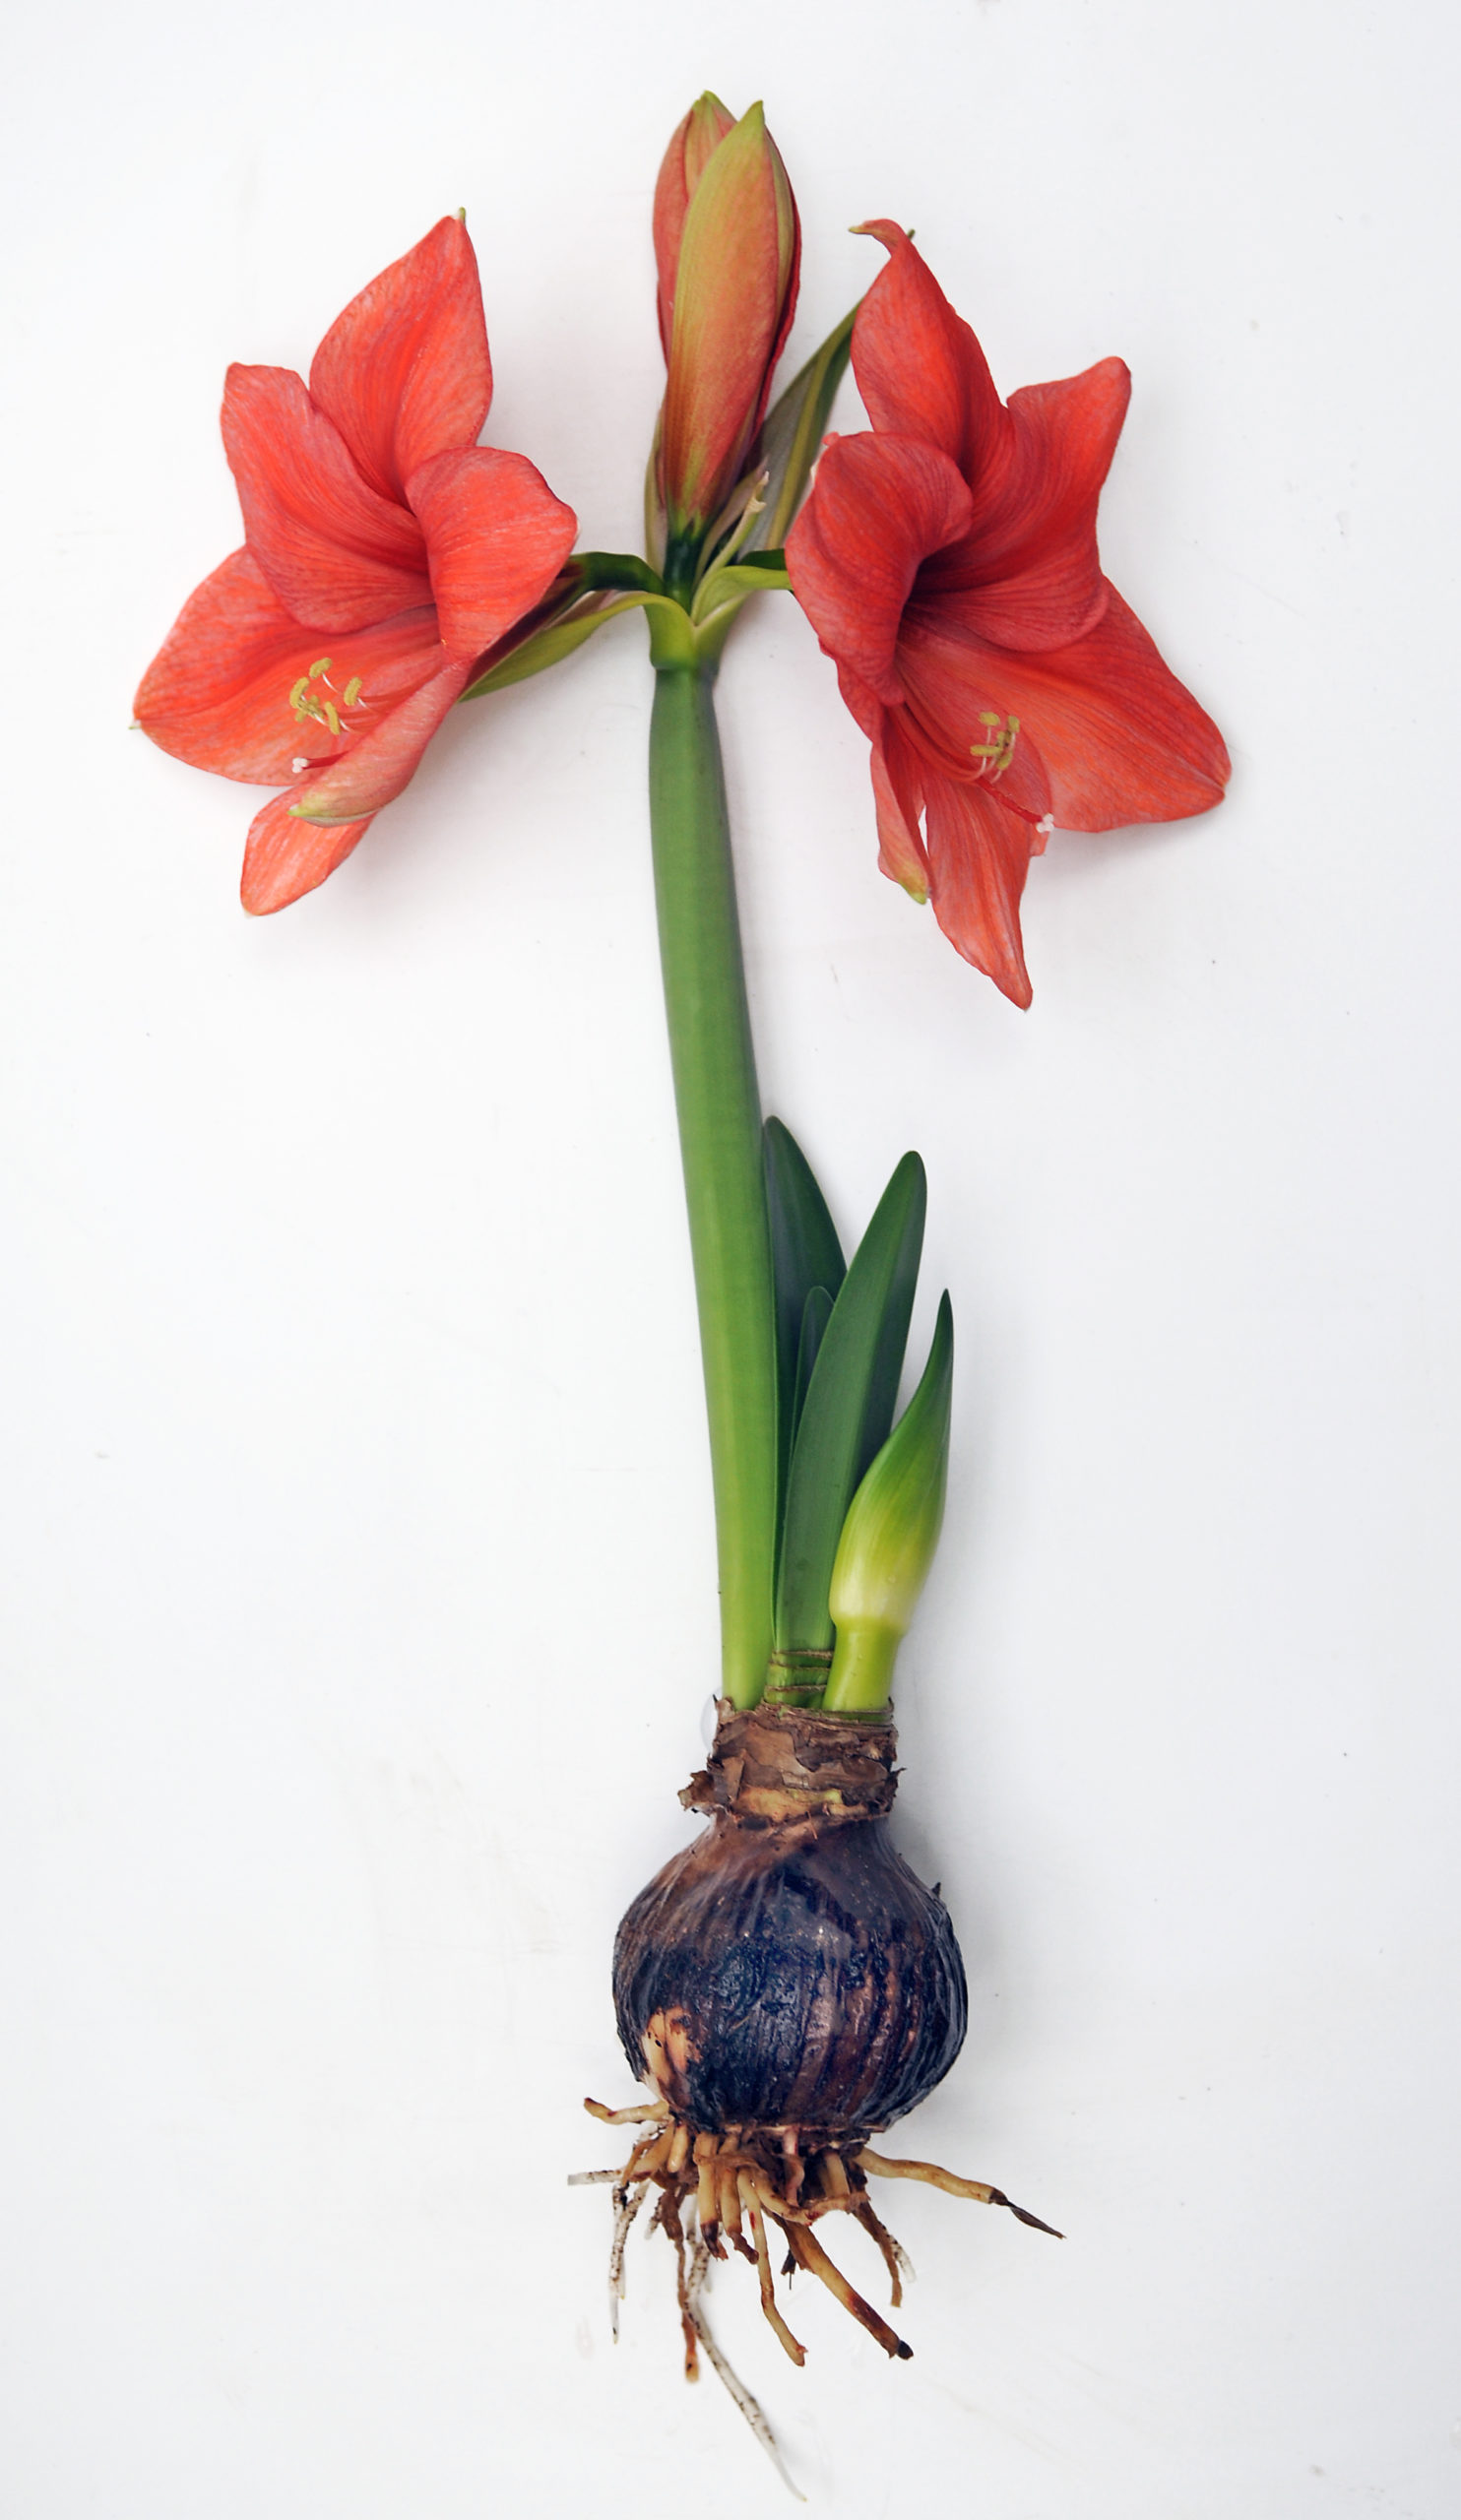 Amaryllis Campaign - Still Going Strong!